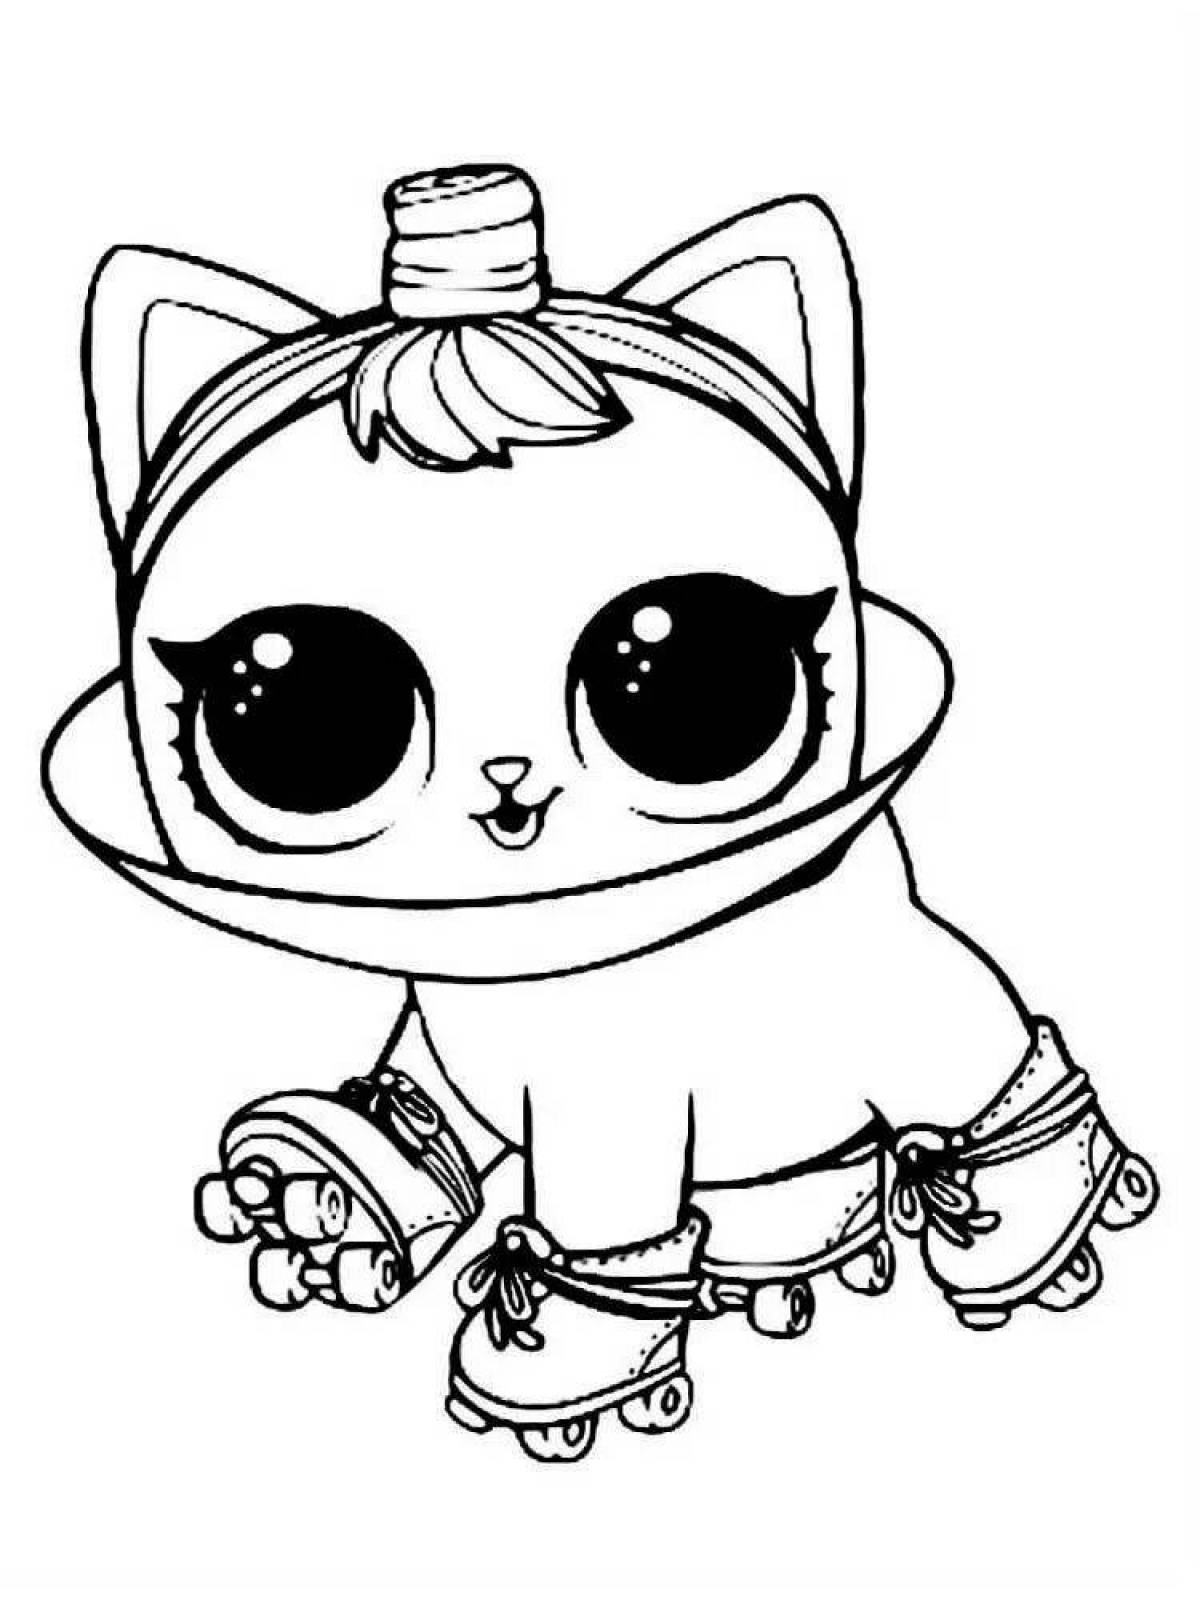 Cute lolo pet coloring page